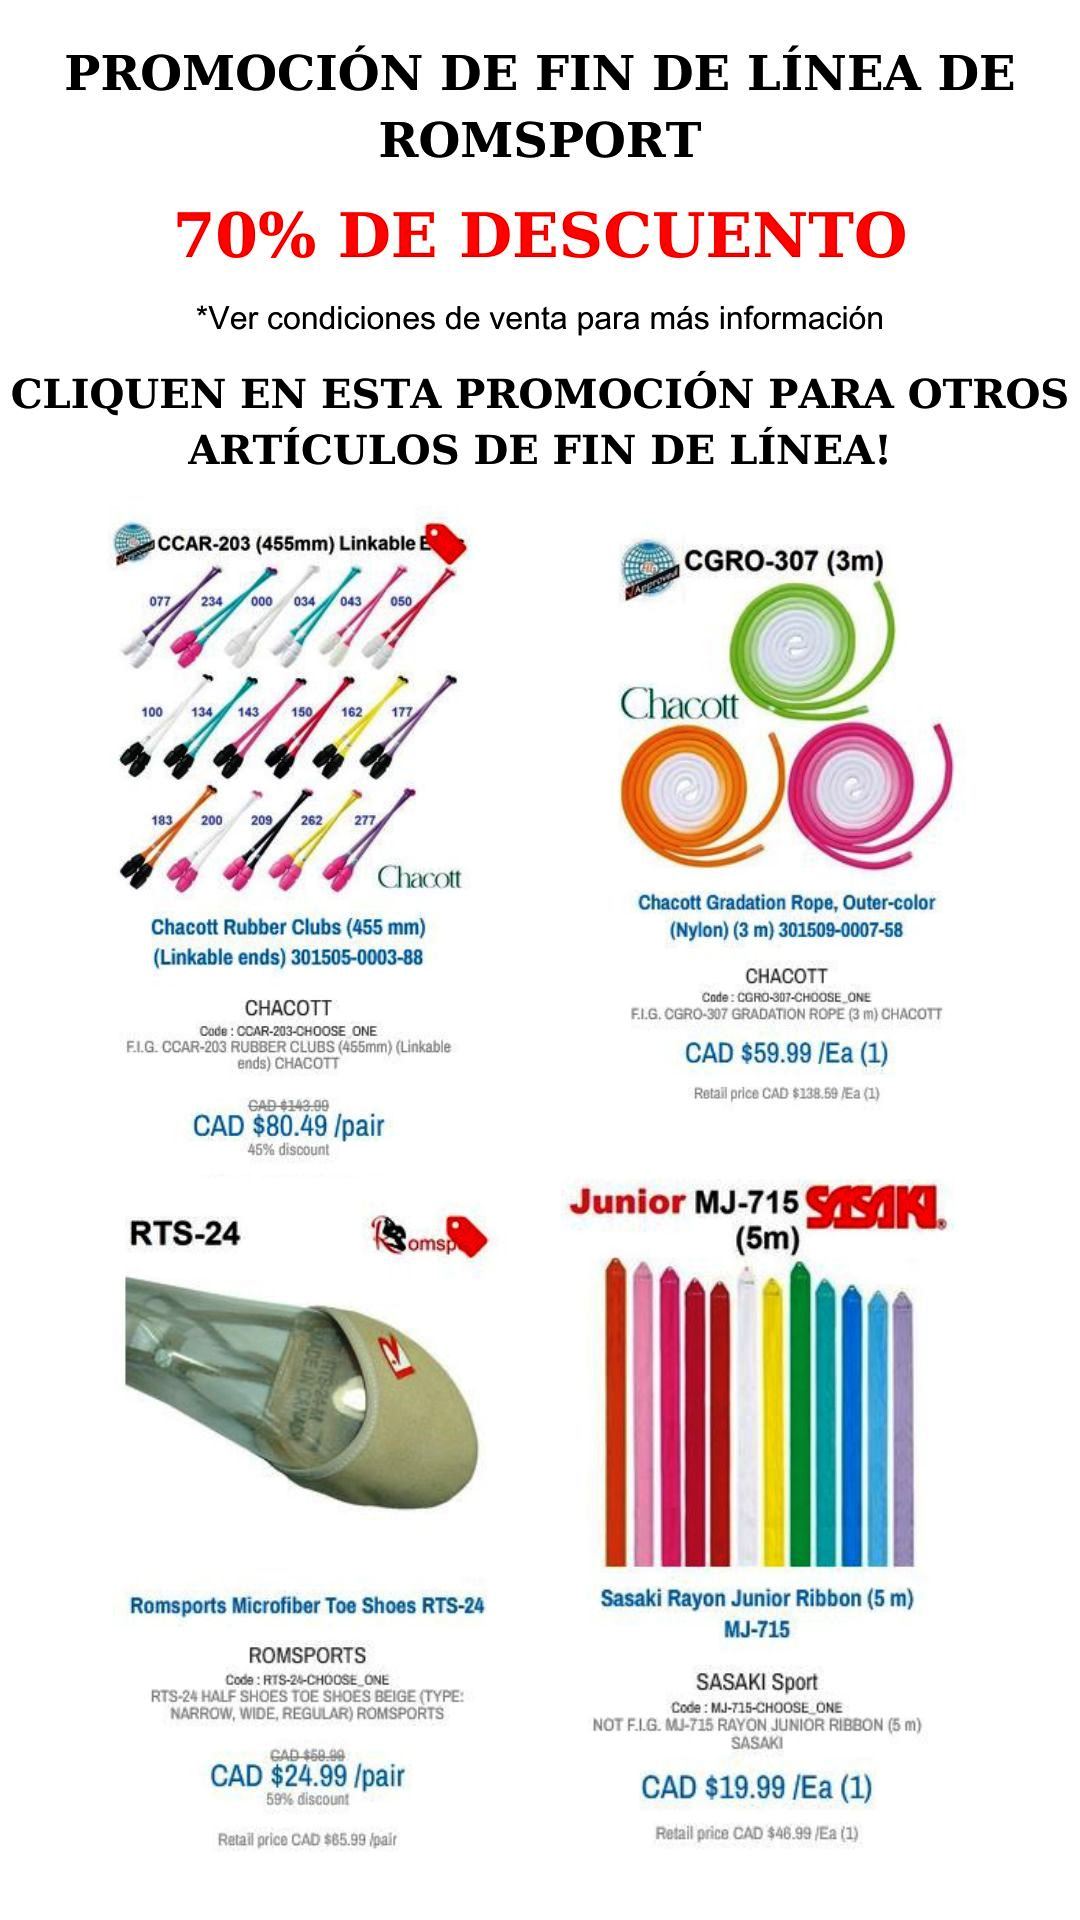 ROMSPORTS END OF LINE PROMOTIONes 240419